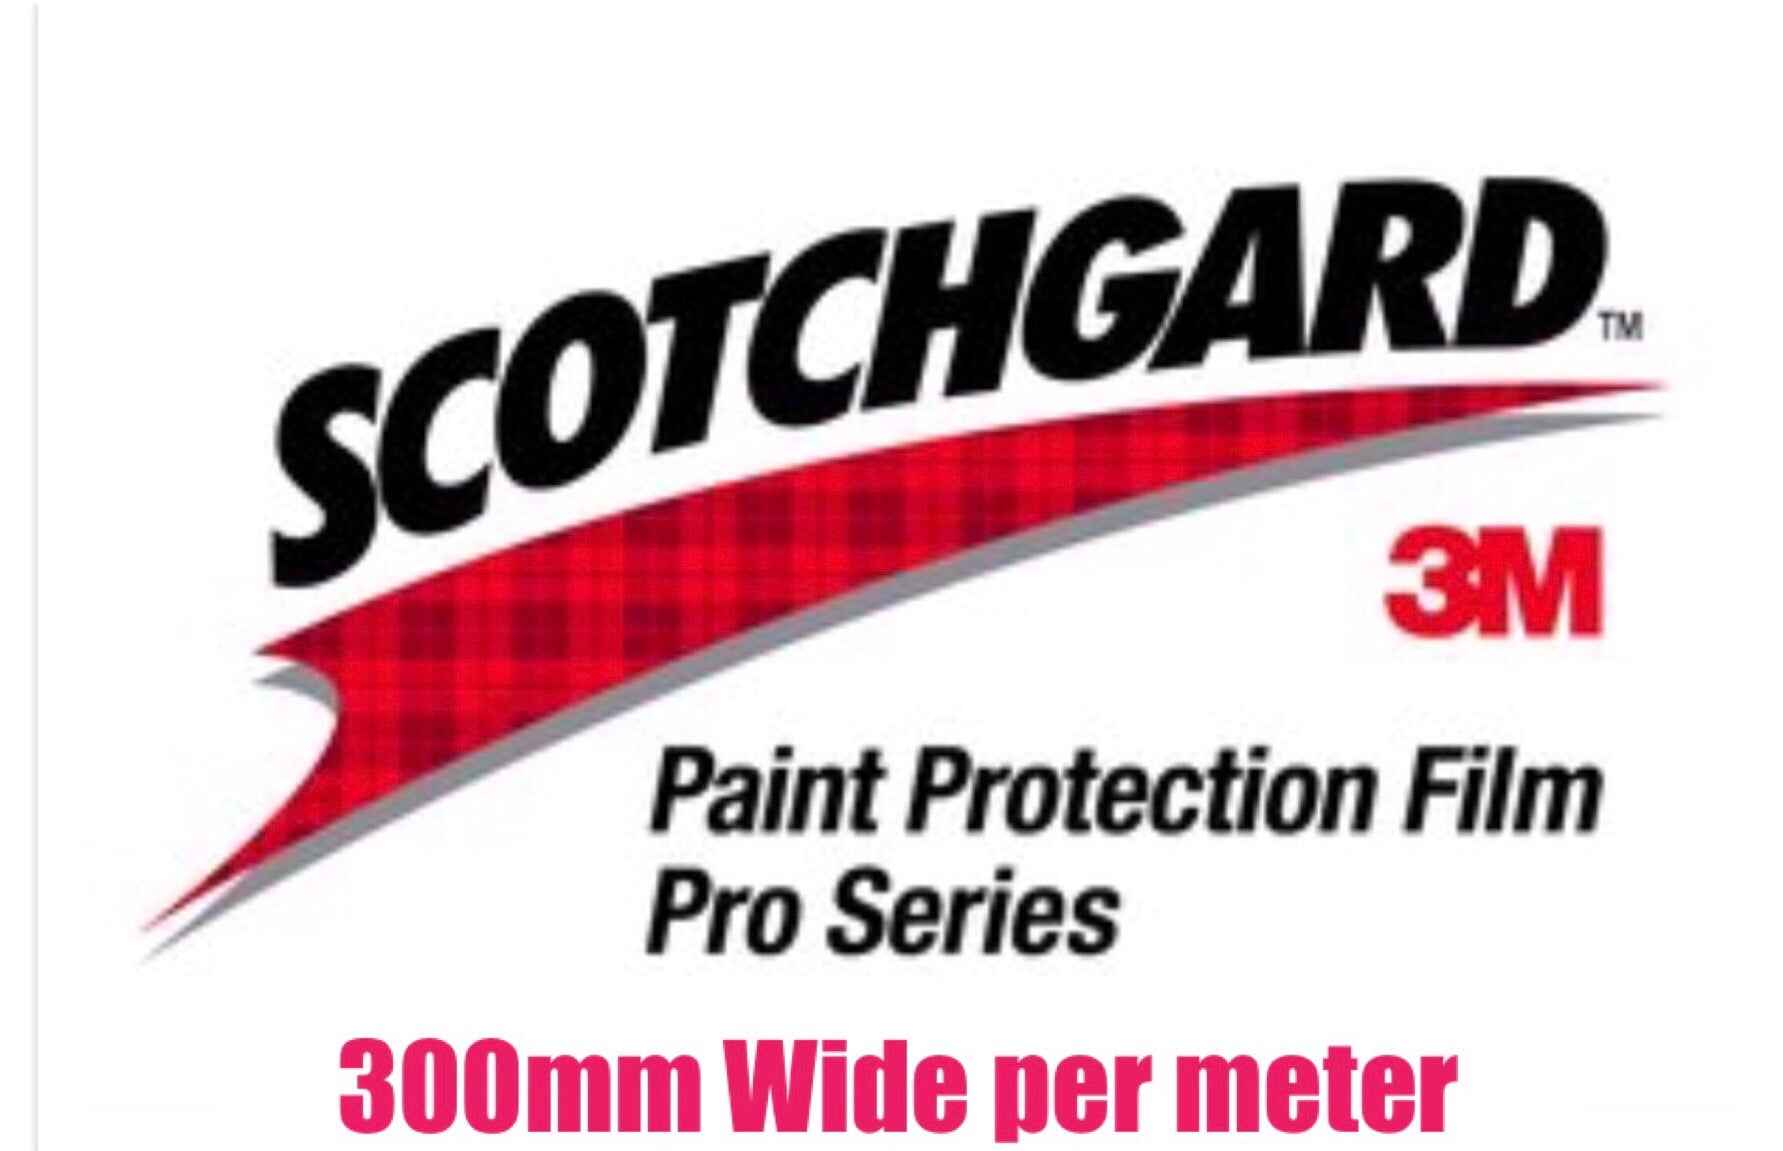 3M Pro Series Paint Protection Clear Film 300mm width per meter